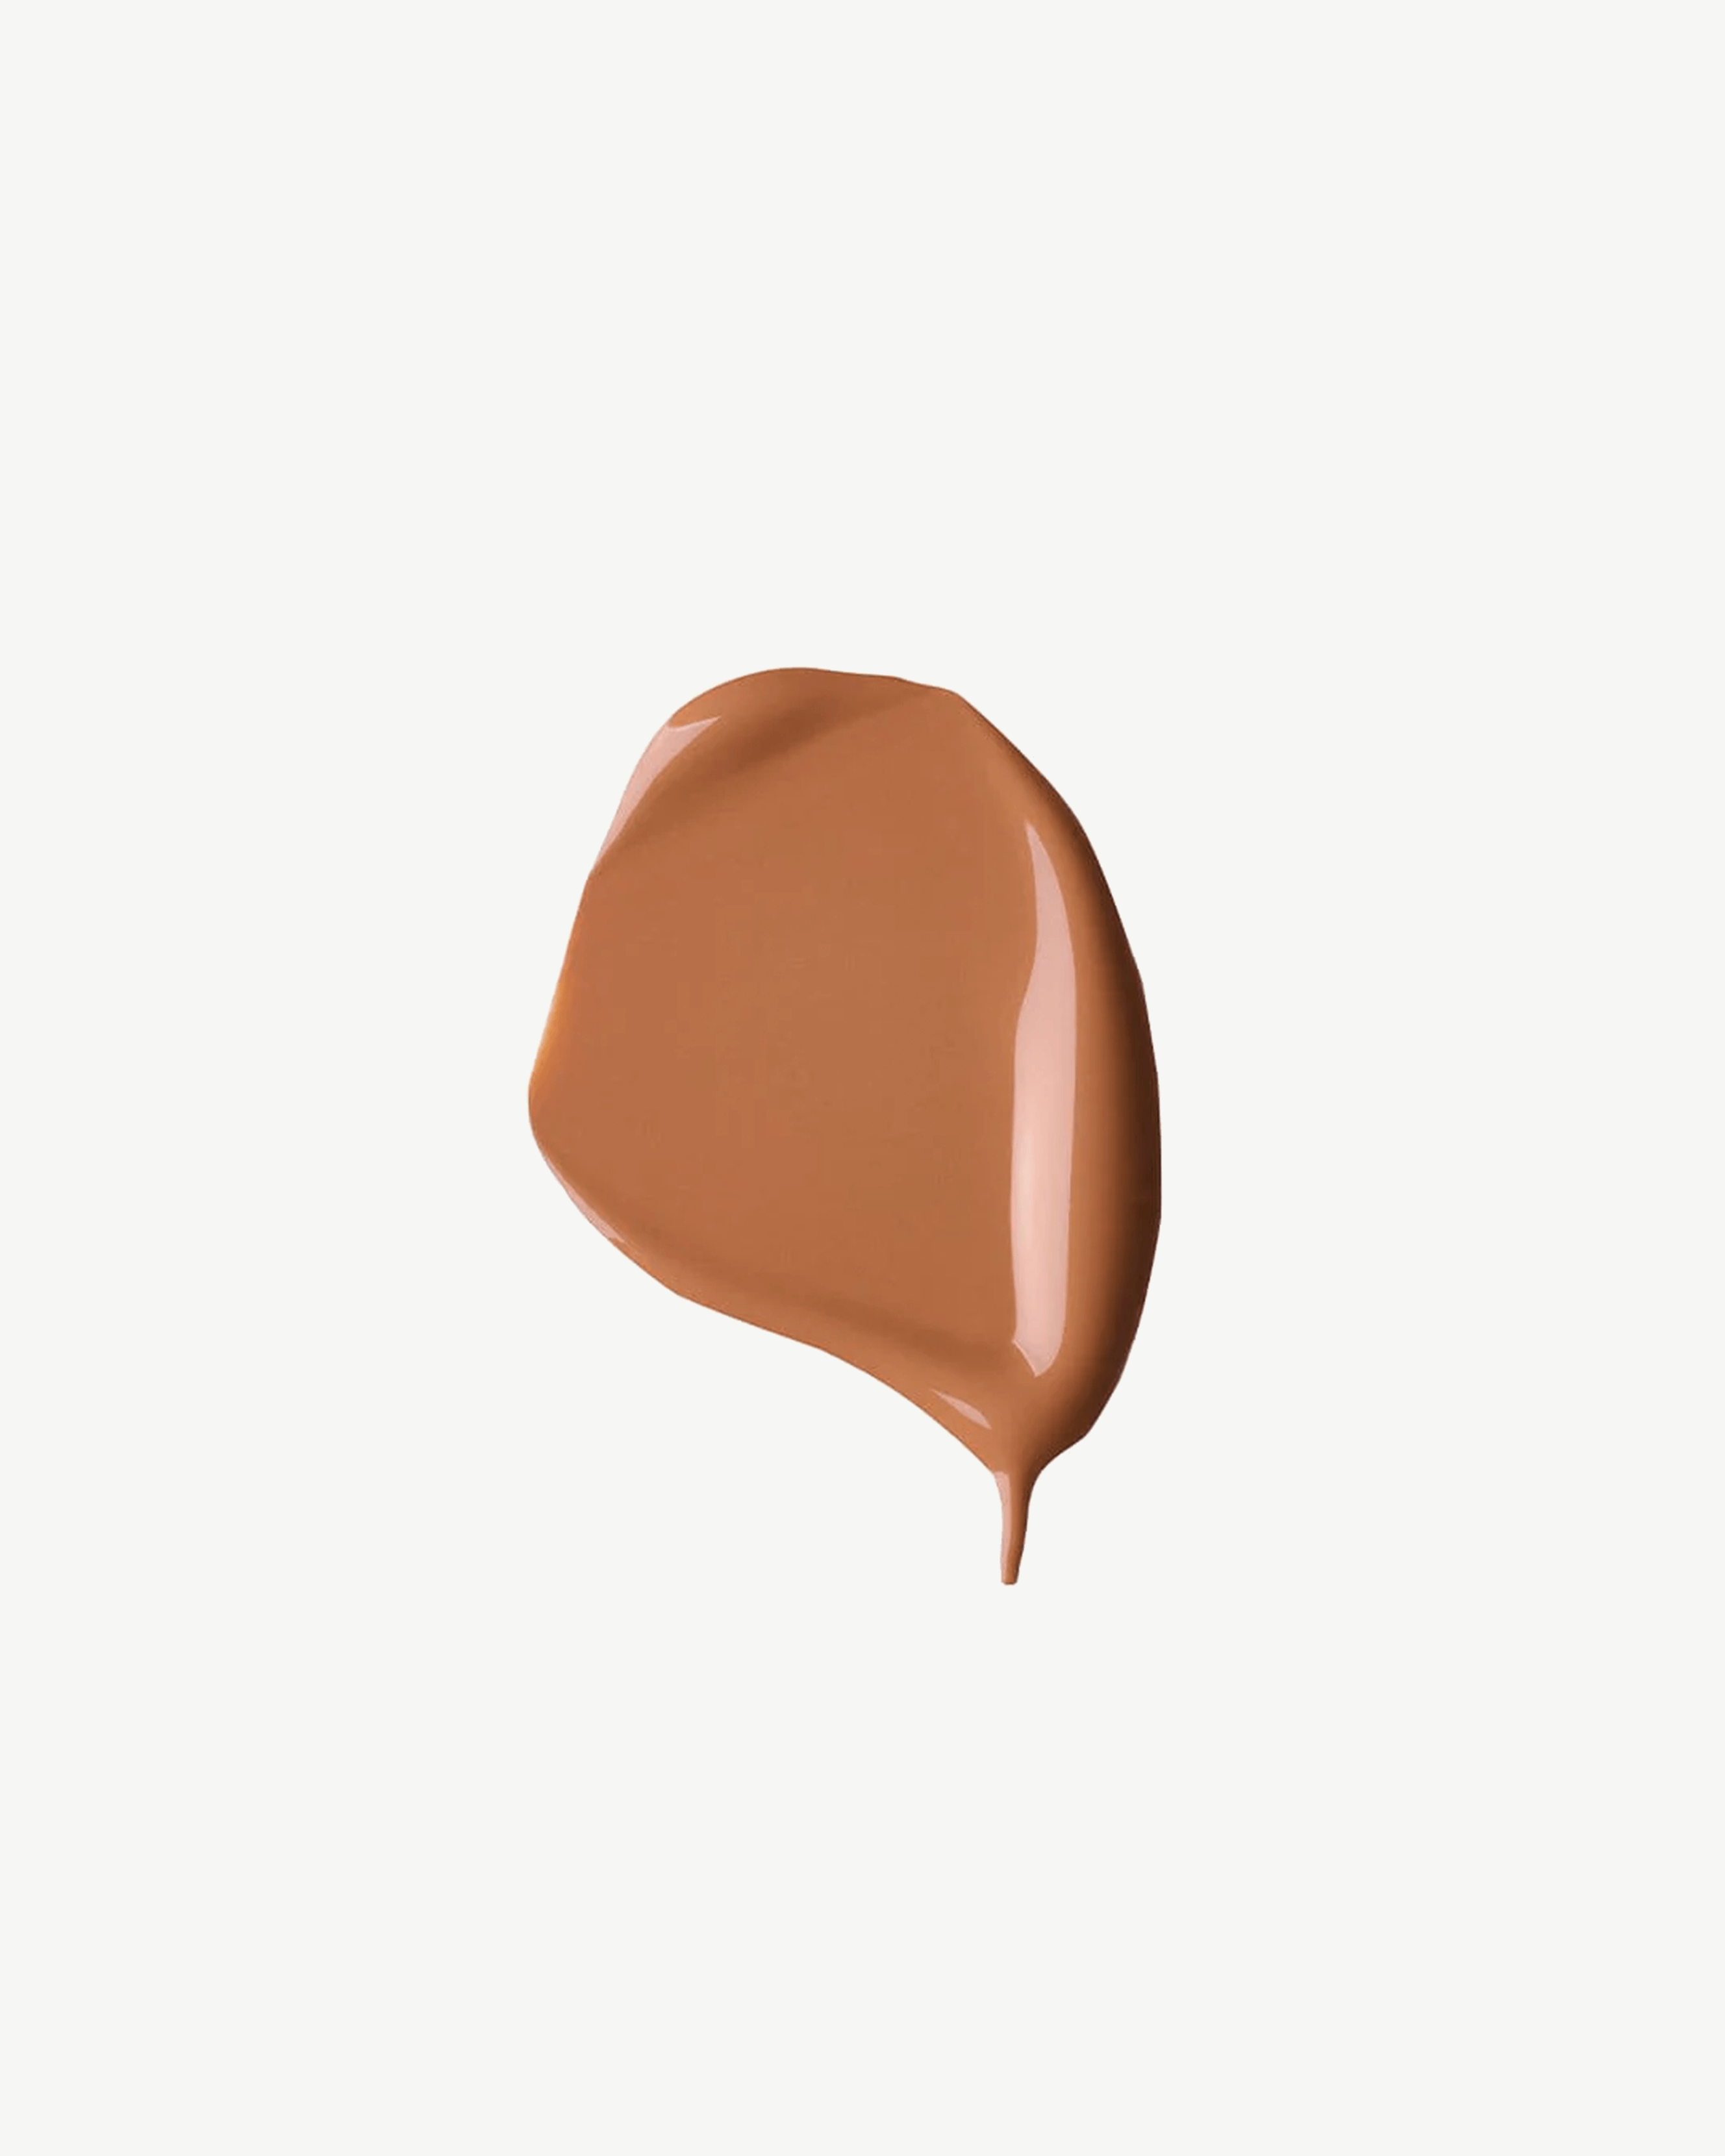 Shade 11 (for deep skin tones with warm-red undertones)